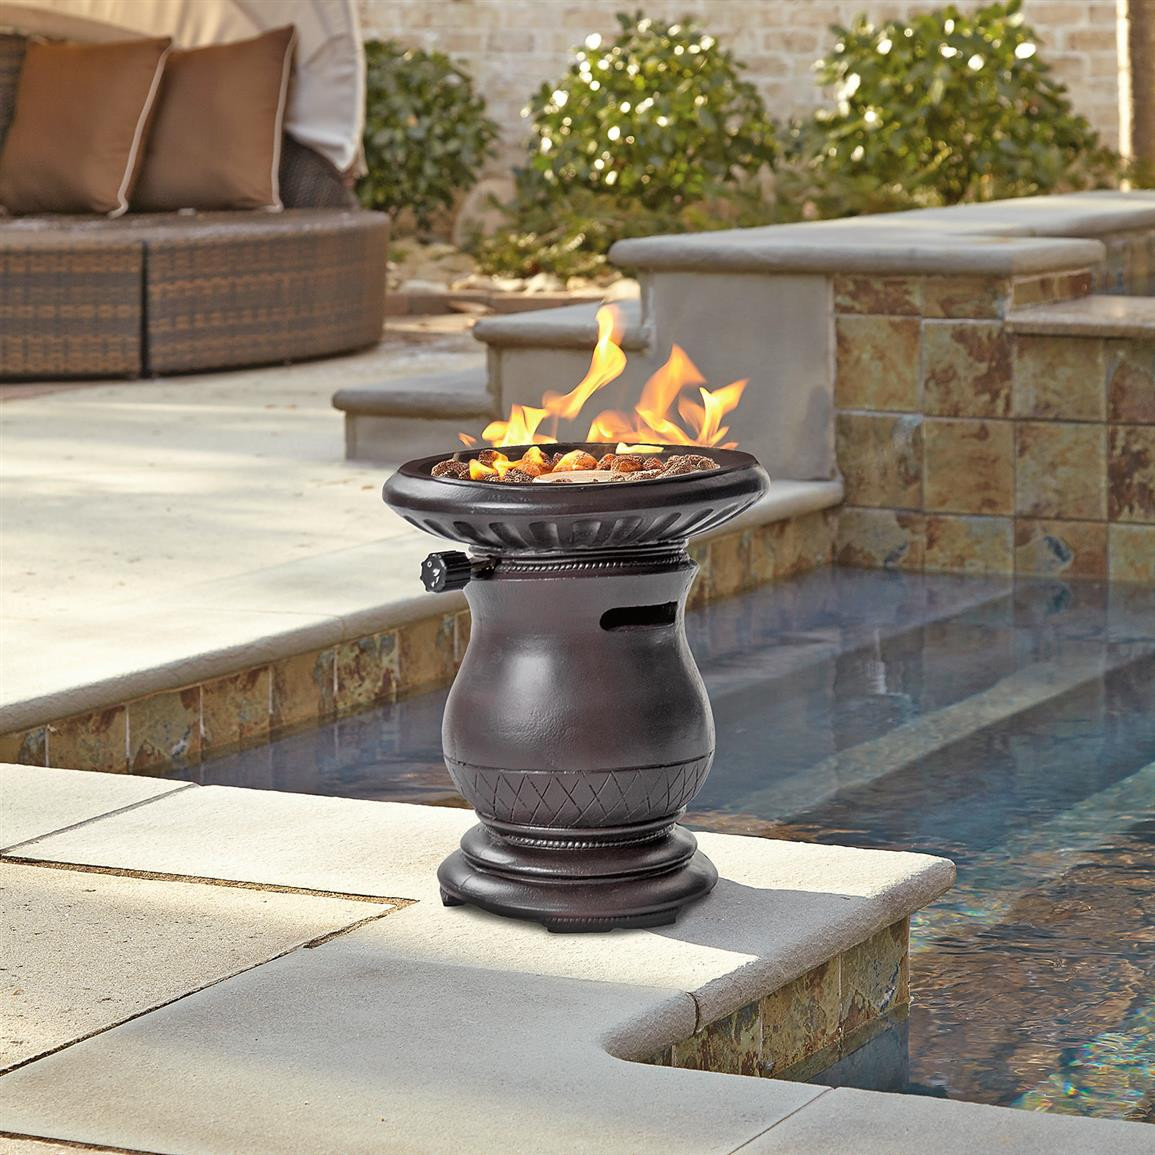 DIY Outdoor Gas Fire Pit
 Outdoor & Patio Appealing Diy Gas Fire Pit Design For